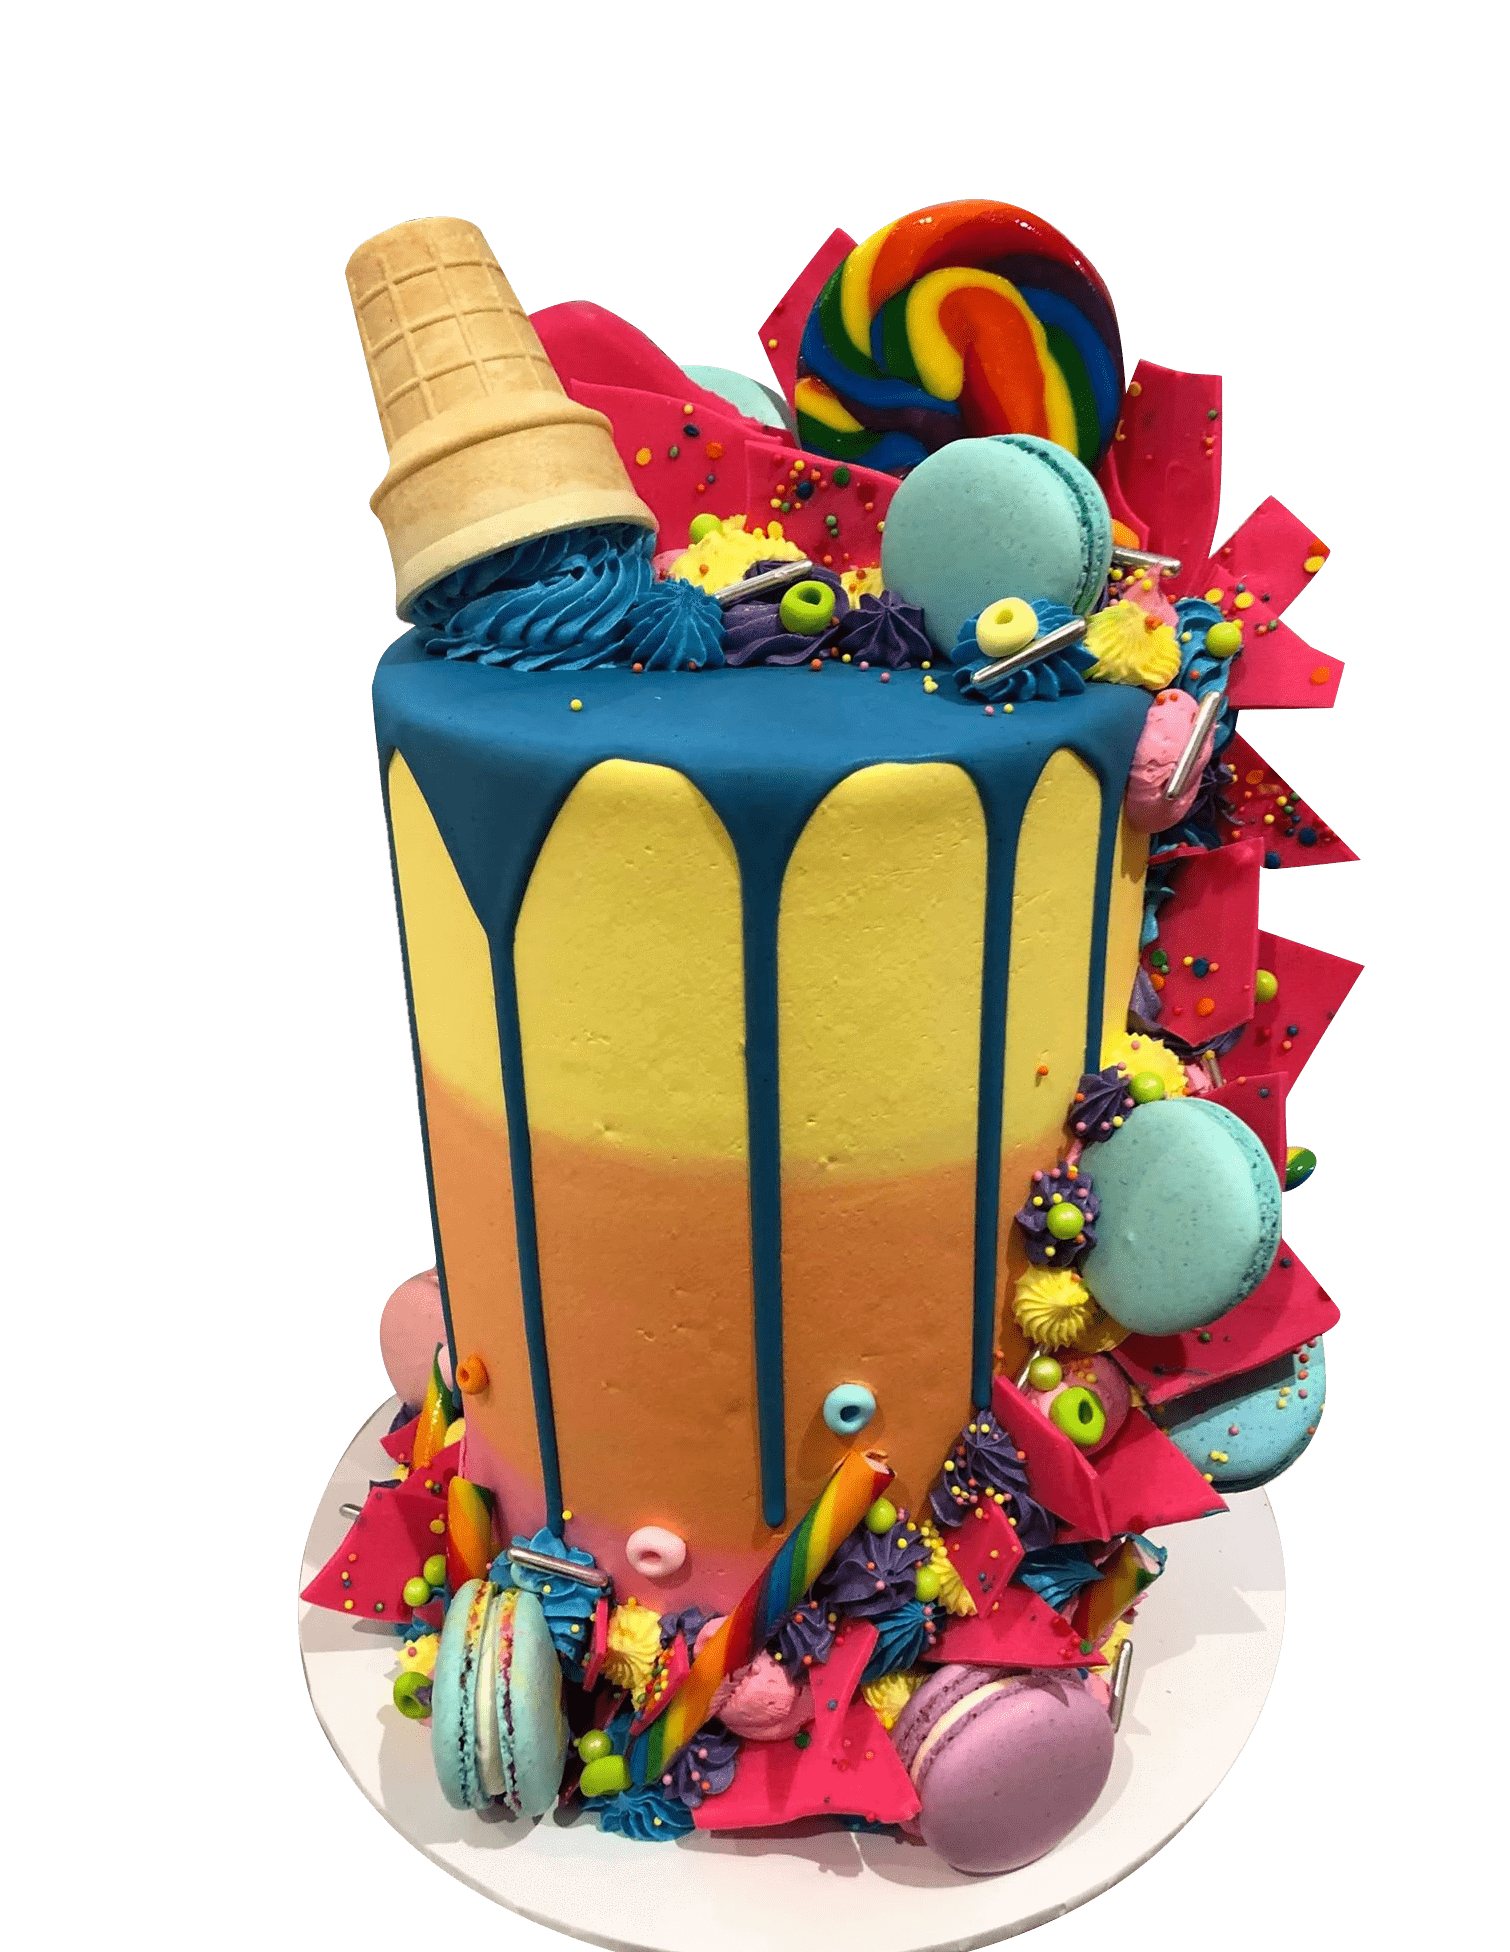 Cake Creations by Kate™ SpecialityCakes Vibrant Candies and Macarons Ombre Buttercream Double-Height Speciality Cake